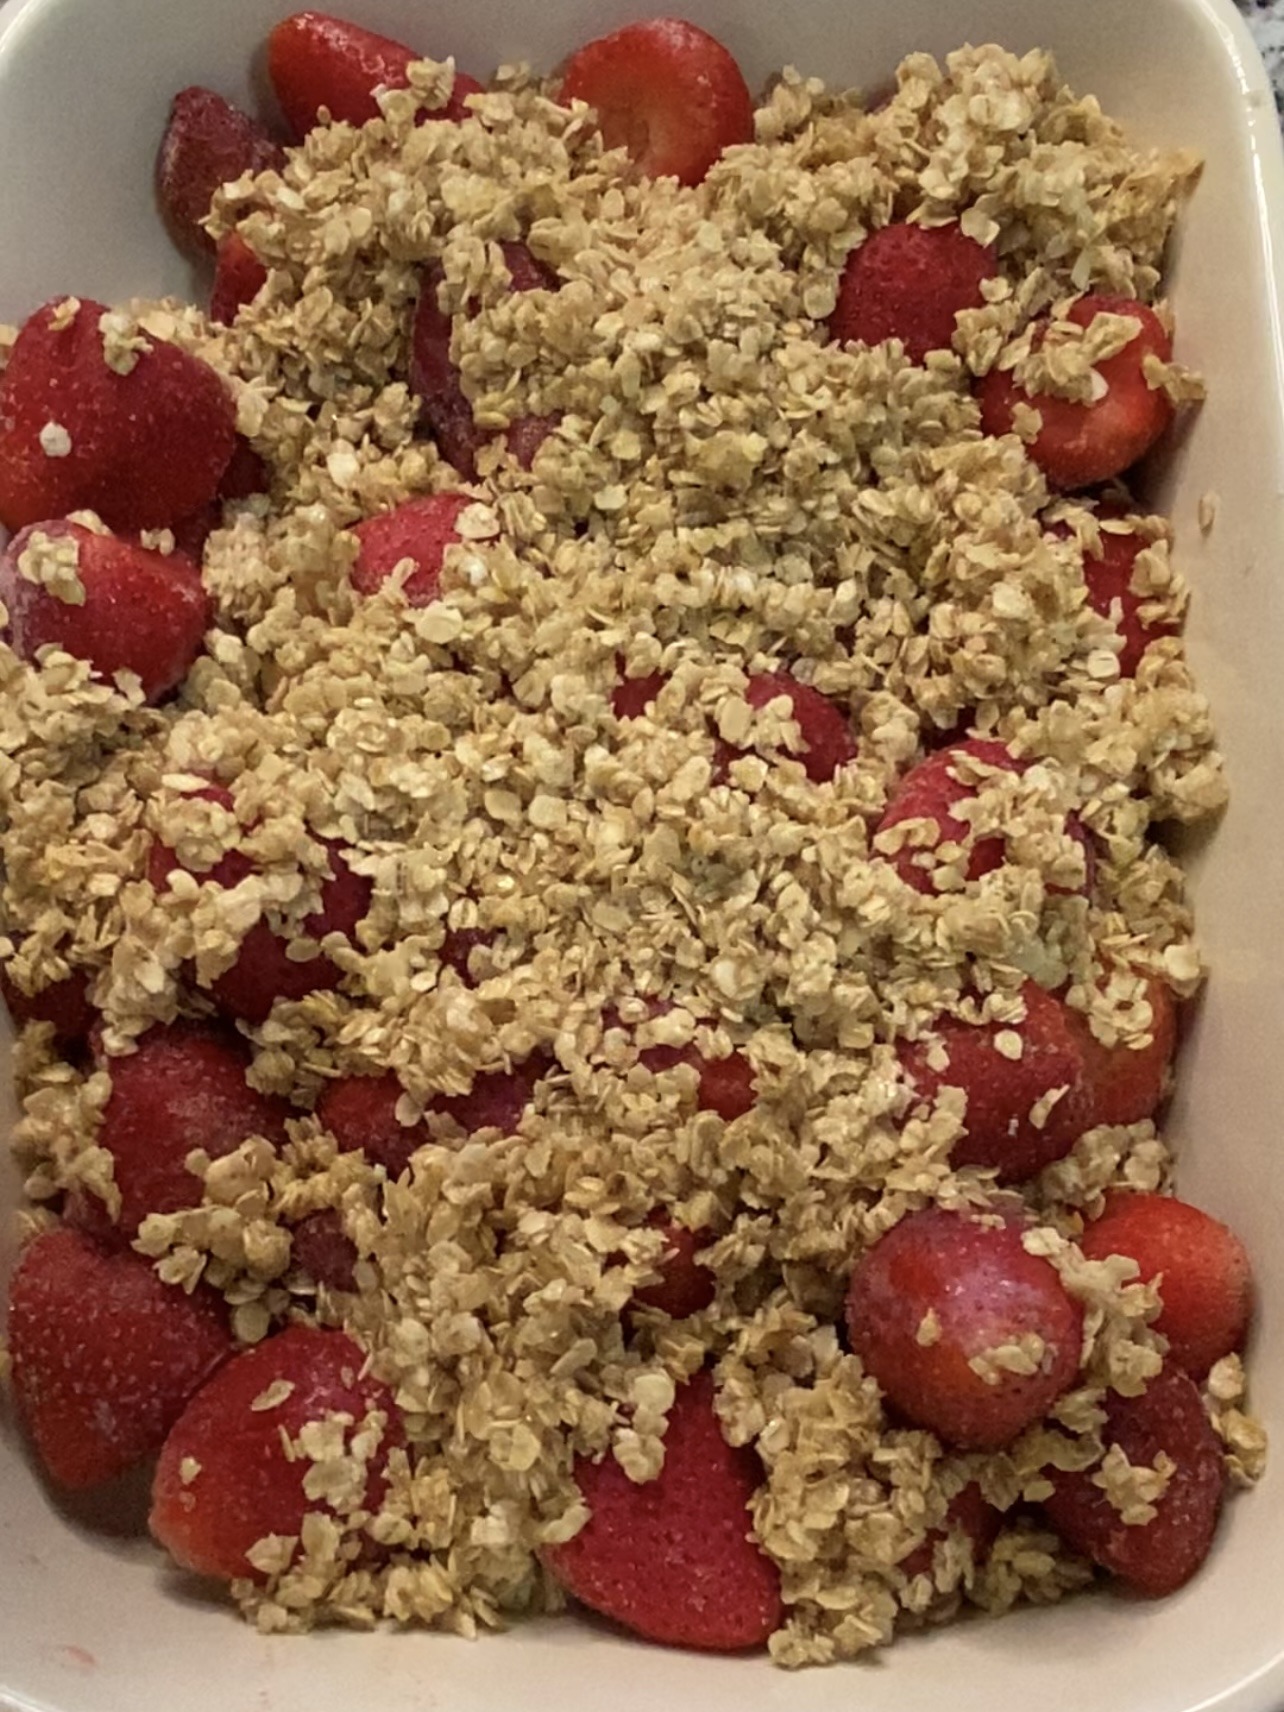 Sprinkling oat topping over strawberries.